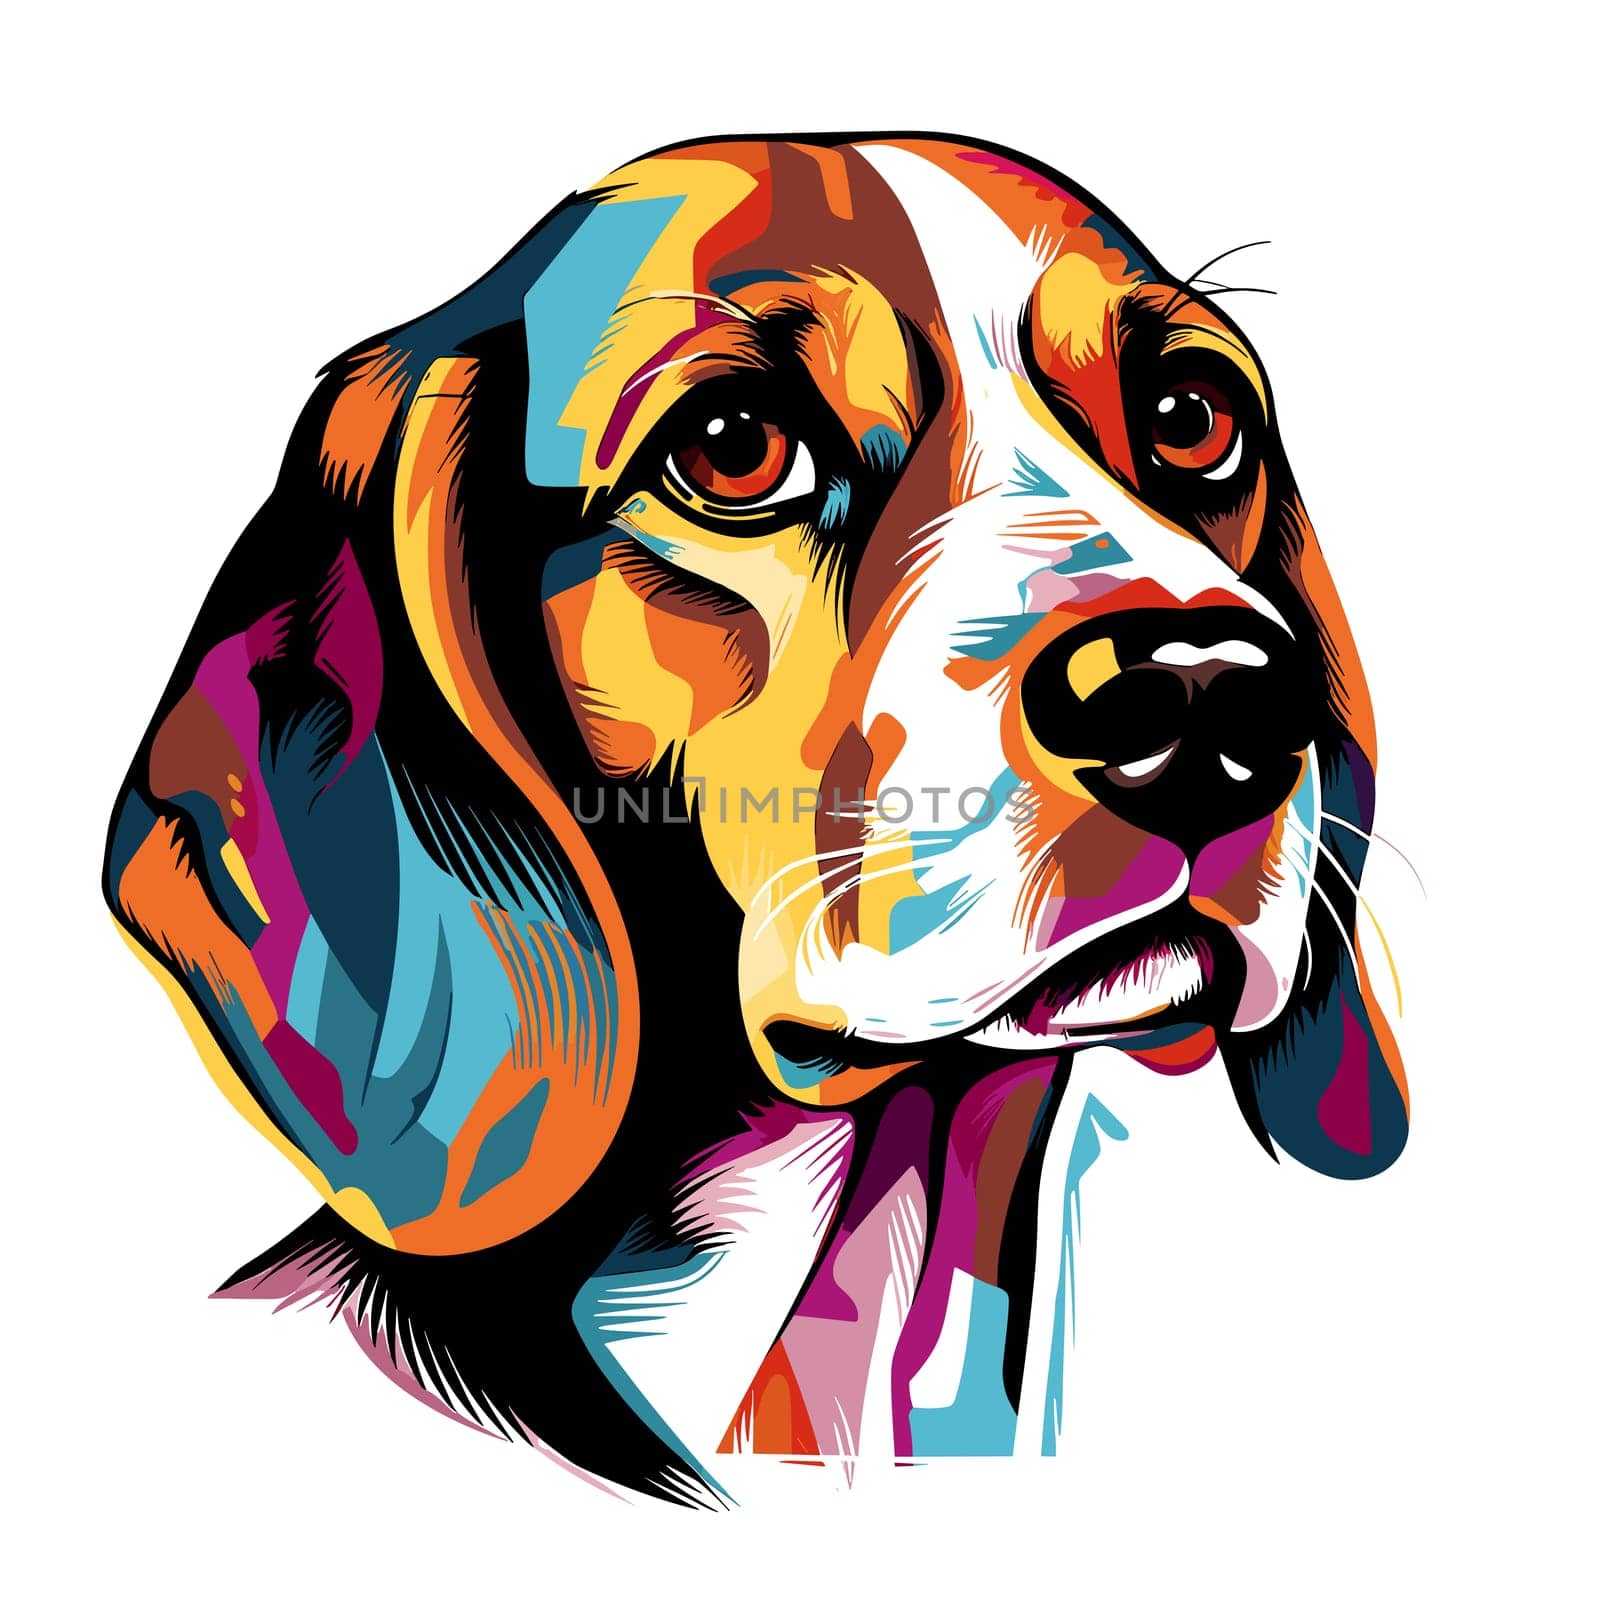 Portrait of a beagle breed dog in vector pop art style isolated on white background. Template for poster, sticker, t-shirt print, etc.